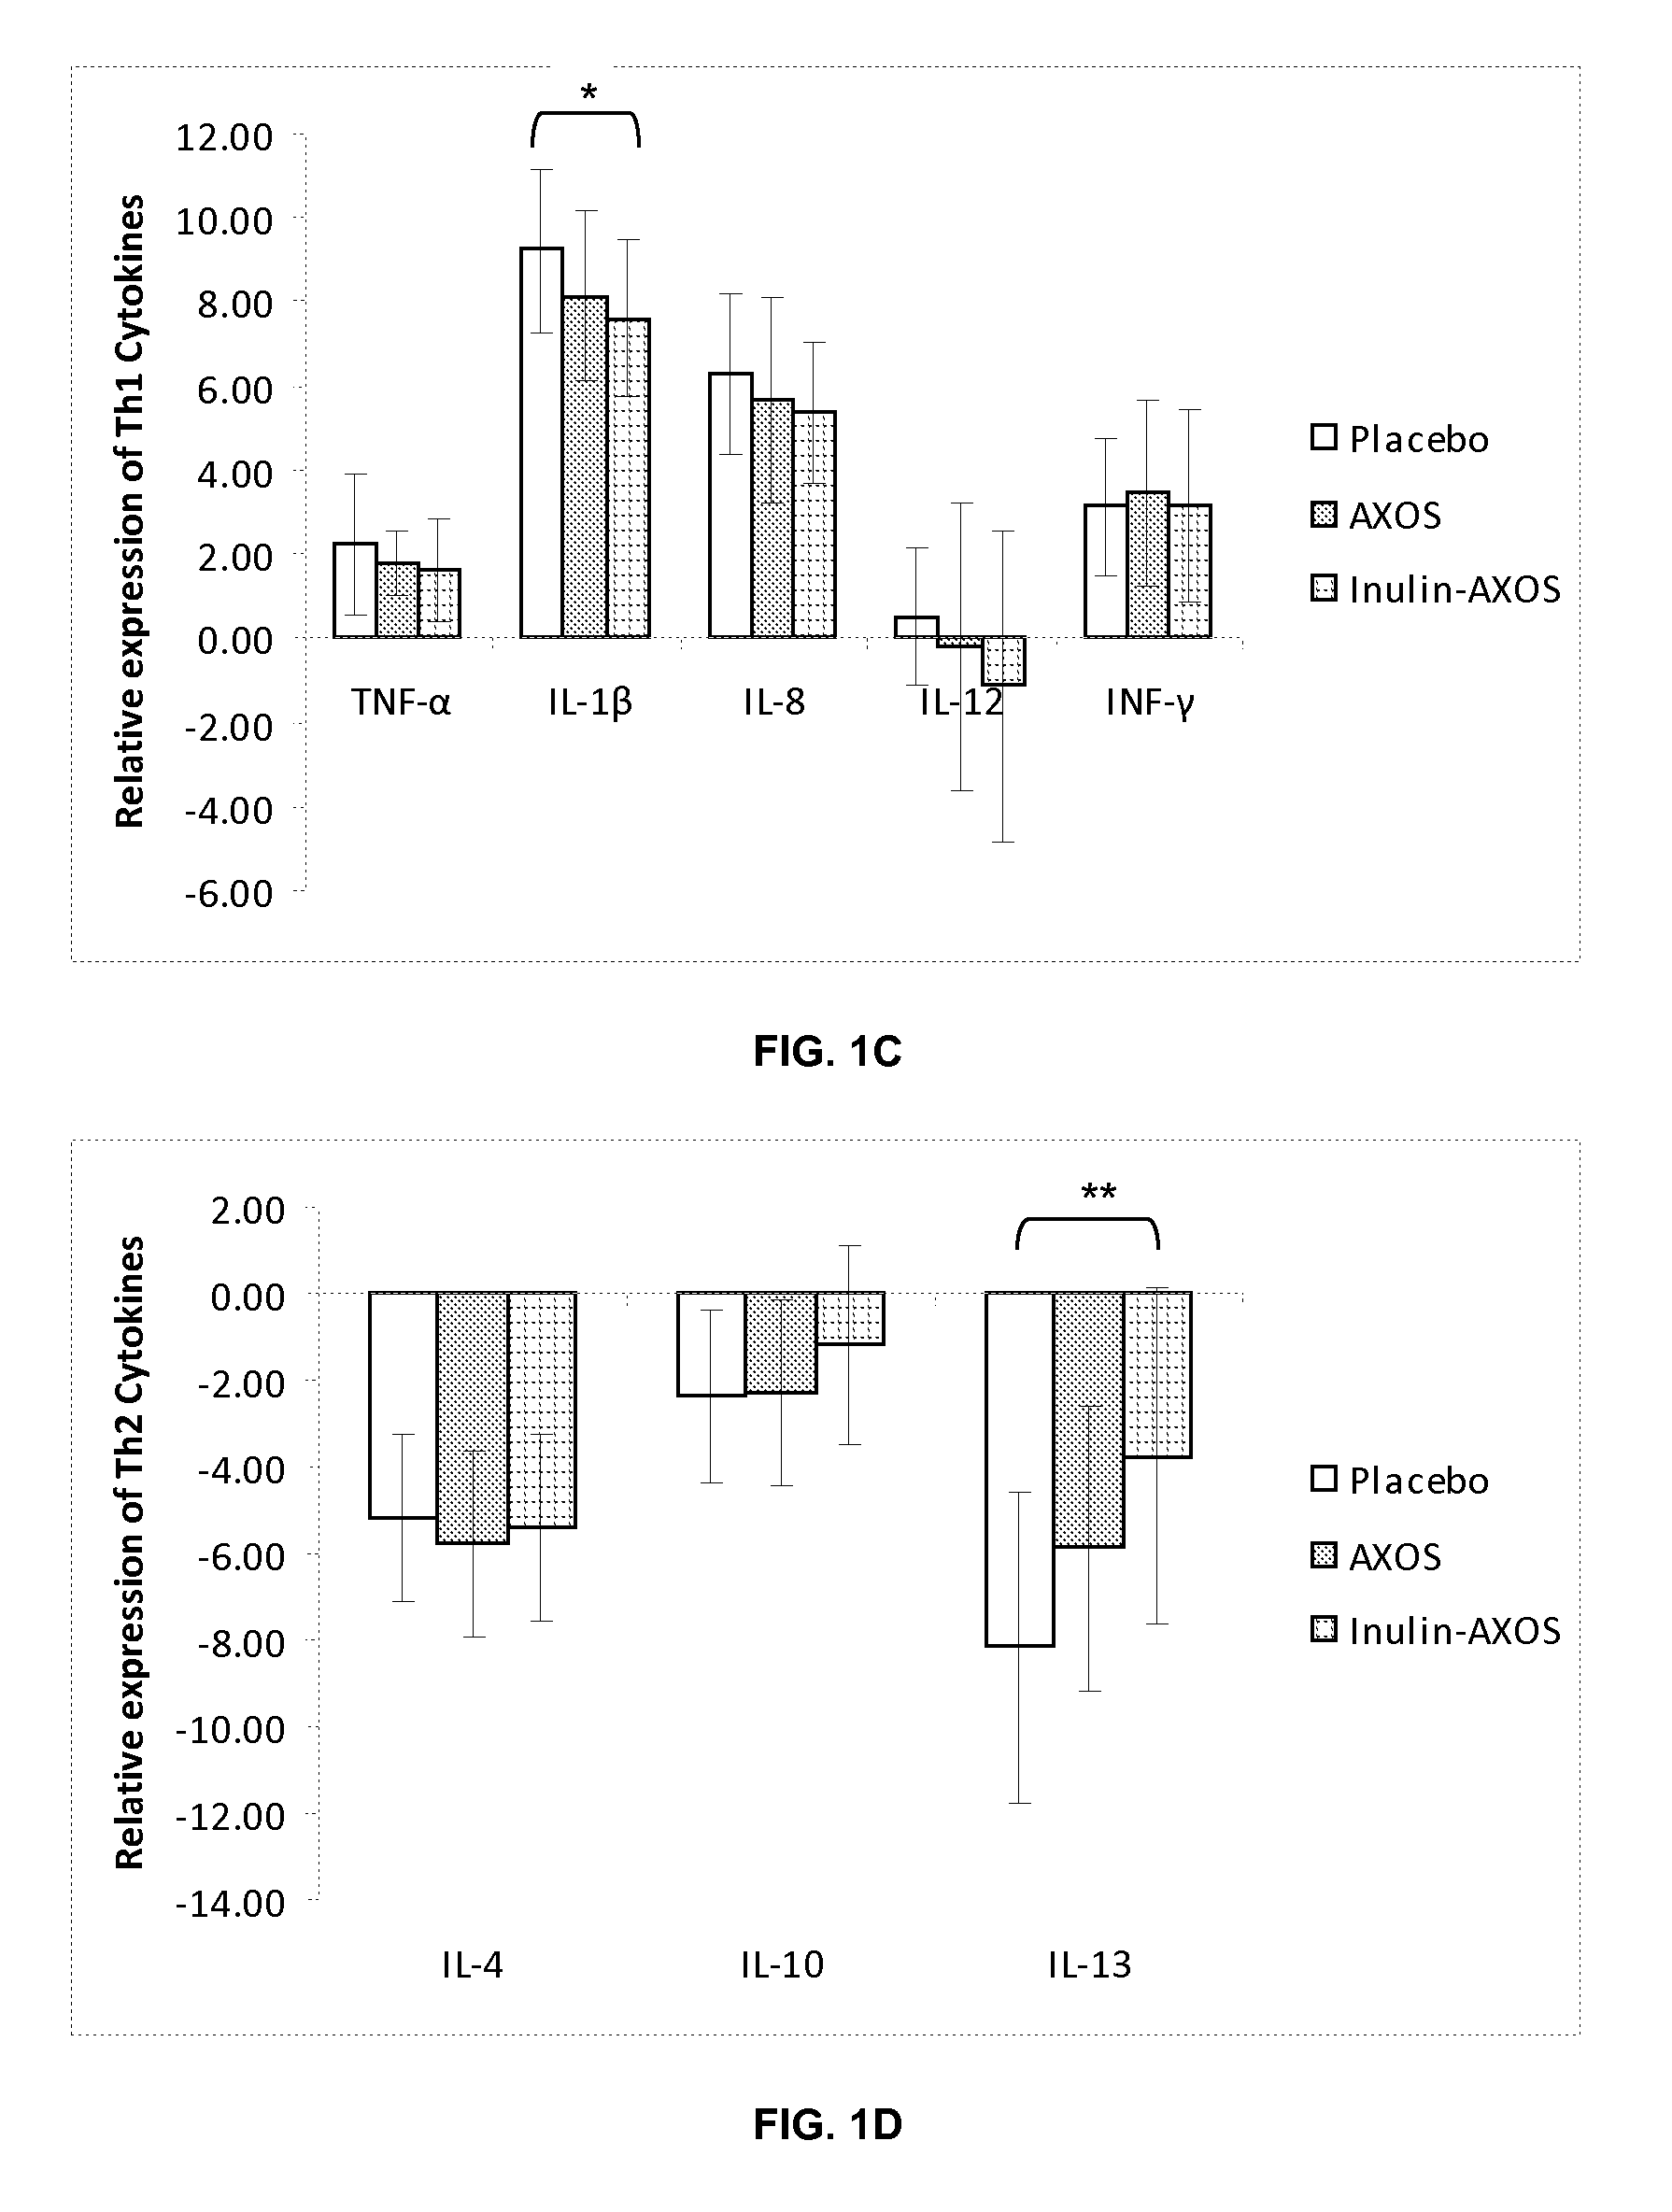 Compositions containing mixtures of fermentable fibers